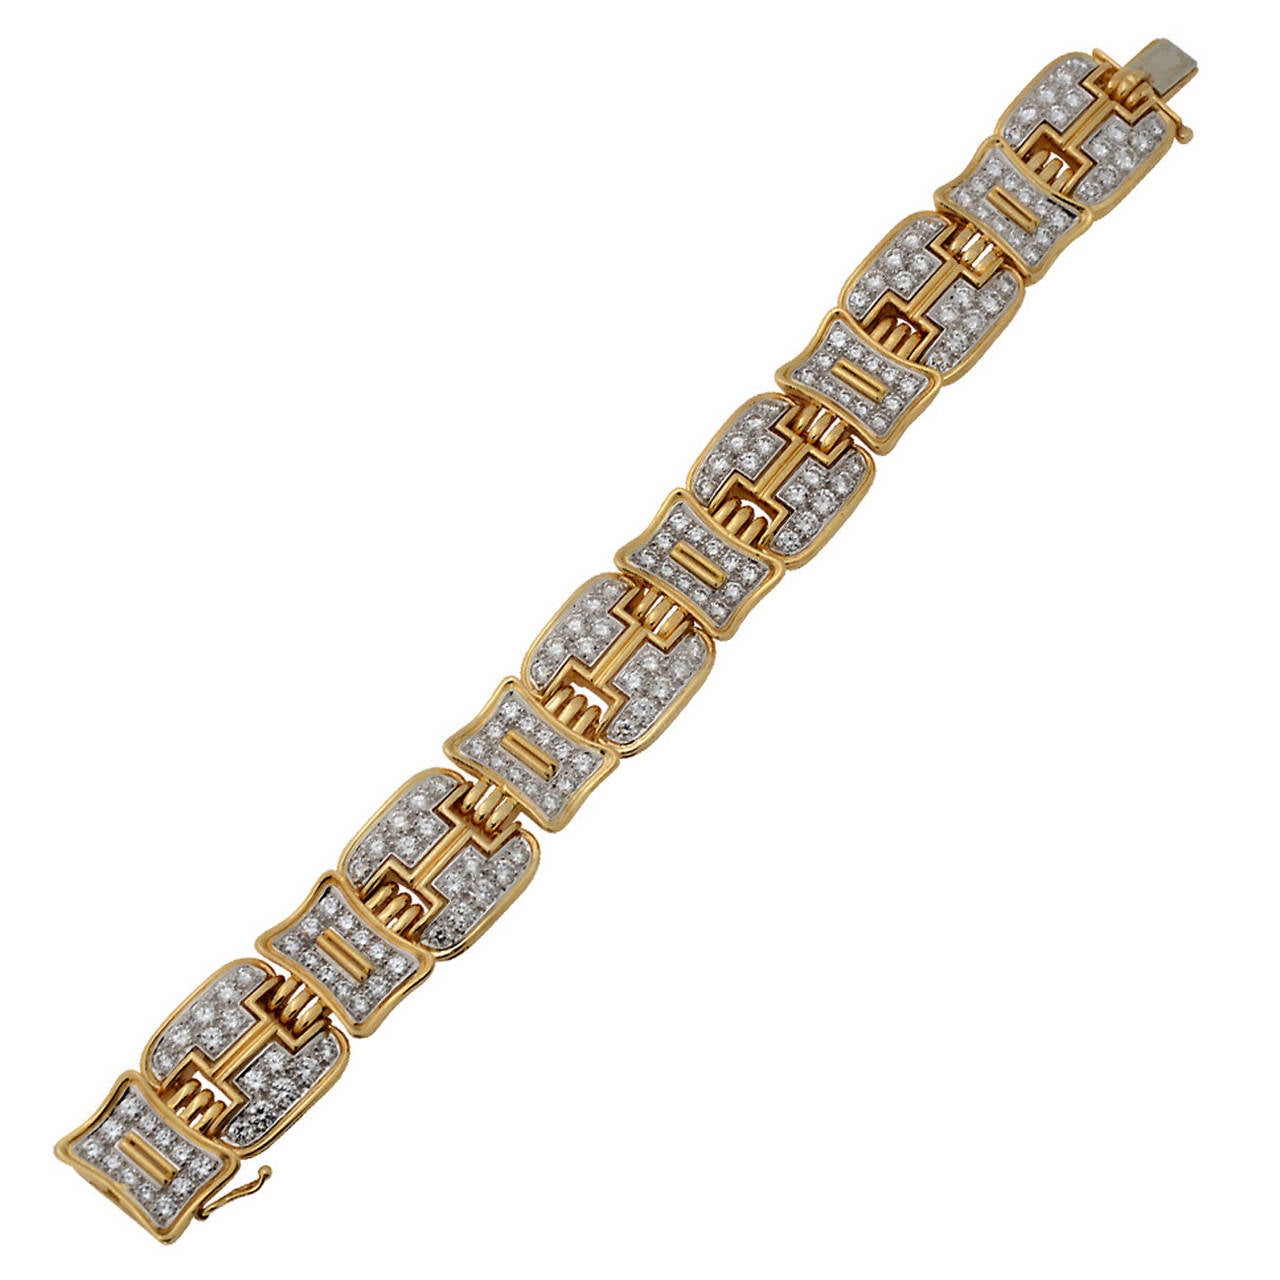 18 Karat White and Yellow Gold Bracelet with 9.18cts of Round Brilliant Cut Diamonds, G Color, VS Clarity.